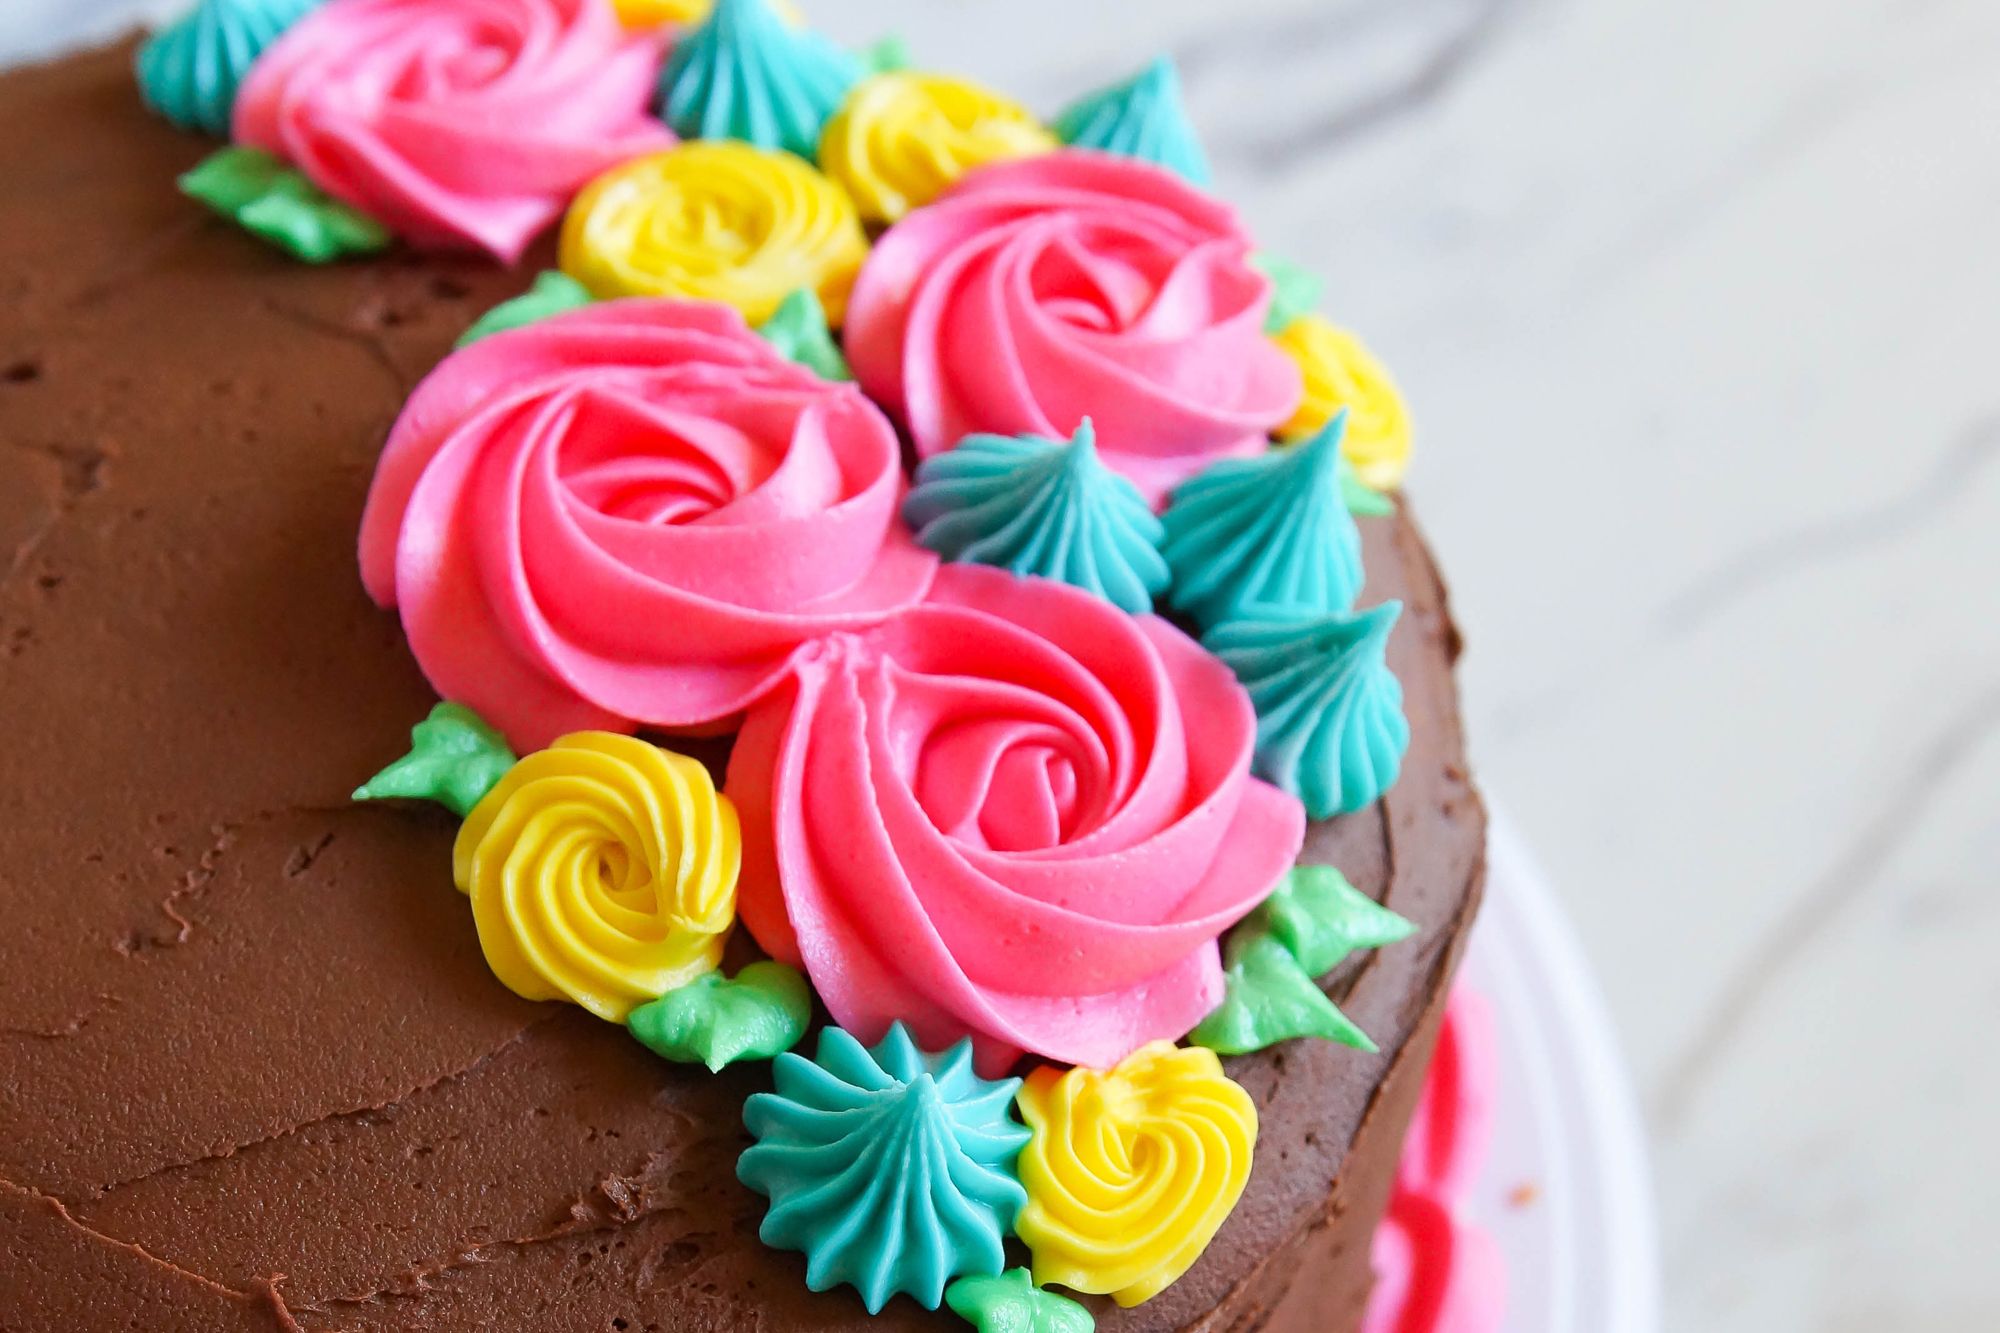 Shital's-Kitchen: Frosting and Decorating A Cake